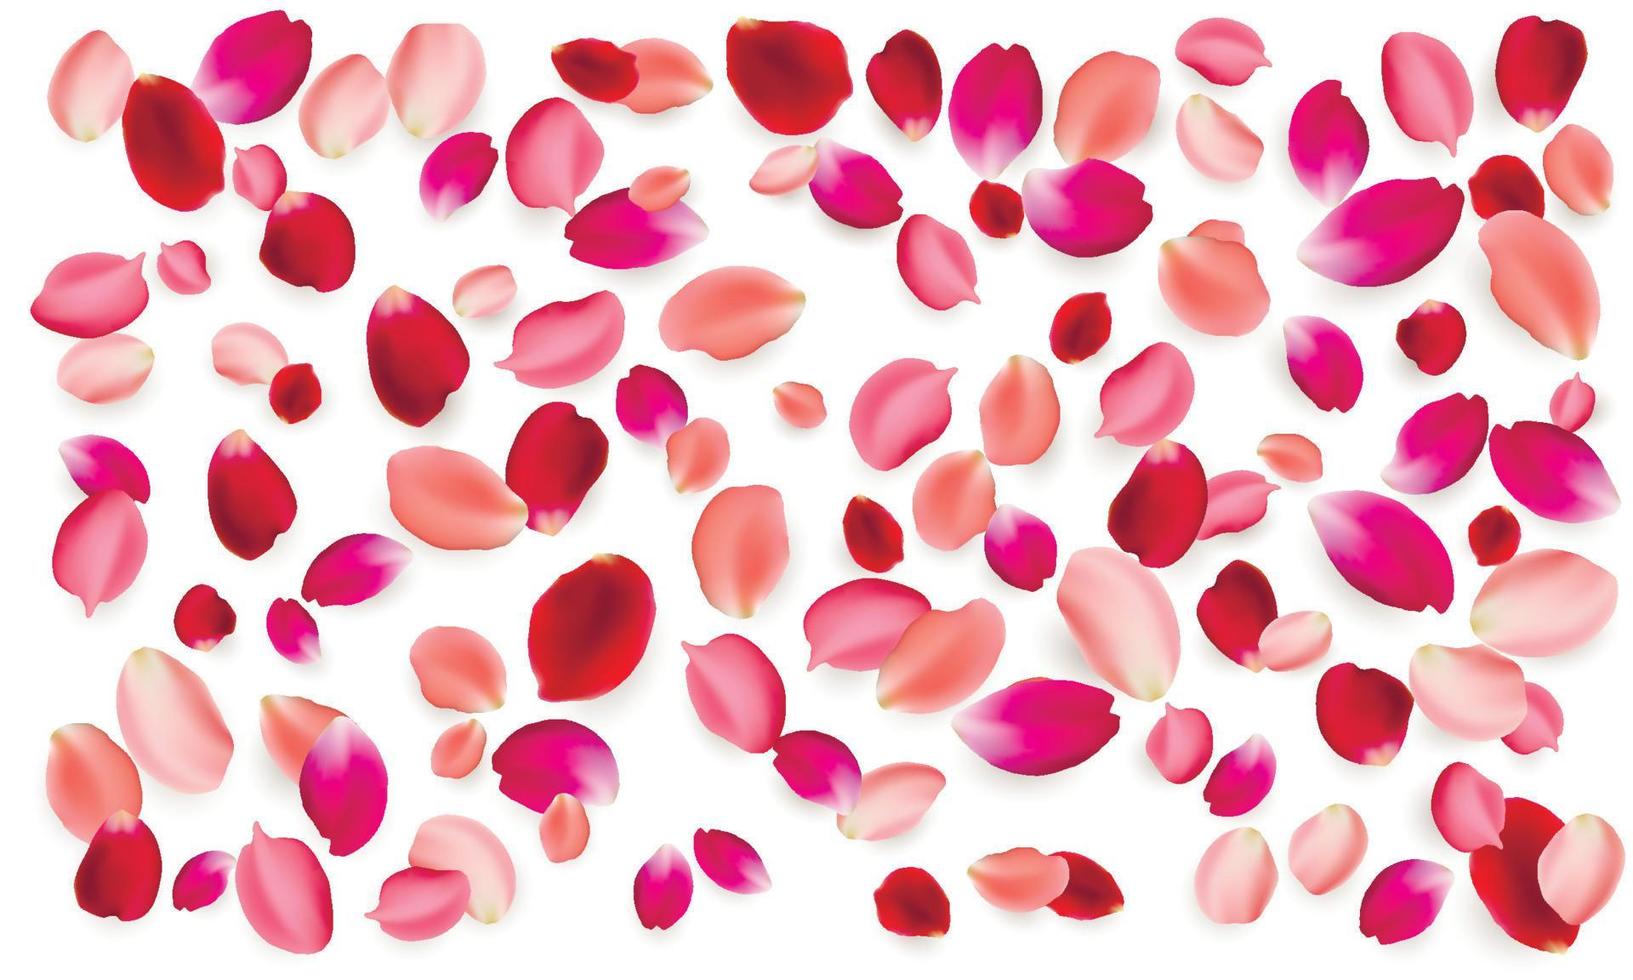 Realistic vector elements set of rose petals. Red and pink petals of rose flower